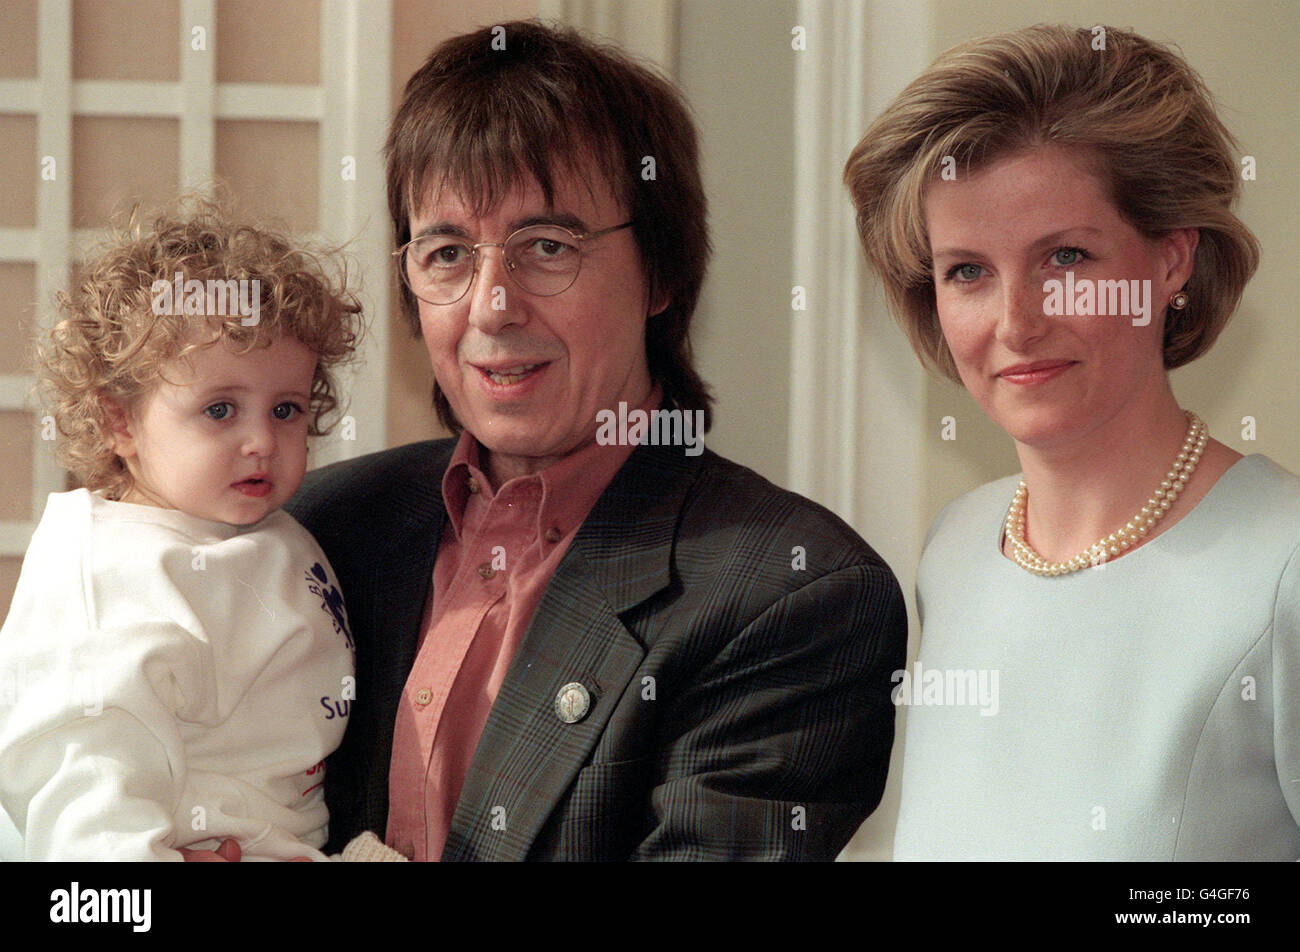 SOPHIE RHYS-JONES POSES WITH BILL WYMAN, A FORMER MEMBER OF THE BAND 'THE ROLLING STONES', AND HIS DAUGHTER KATHARINE AT THE LAUNCH OF NATIONAL MOTHER AND BABY WEEK IN AID OF BABY LIFELINE. * 18/9/2000: Channel 4 was rapped for screening a spoof interview with Wyman without the star's permission. The musician complained to the Independent Television Commission after he was duped into appearing in the chat sequence which was used for the Candid Camera-style Trigger Happy TV show. The ITC upheld the complaint and said the station had broken programme rules 'by its failure to secure permission Stock Photo